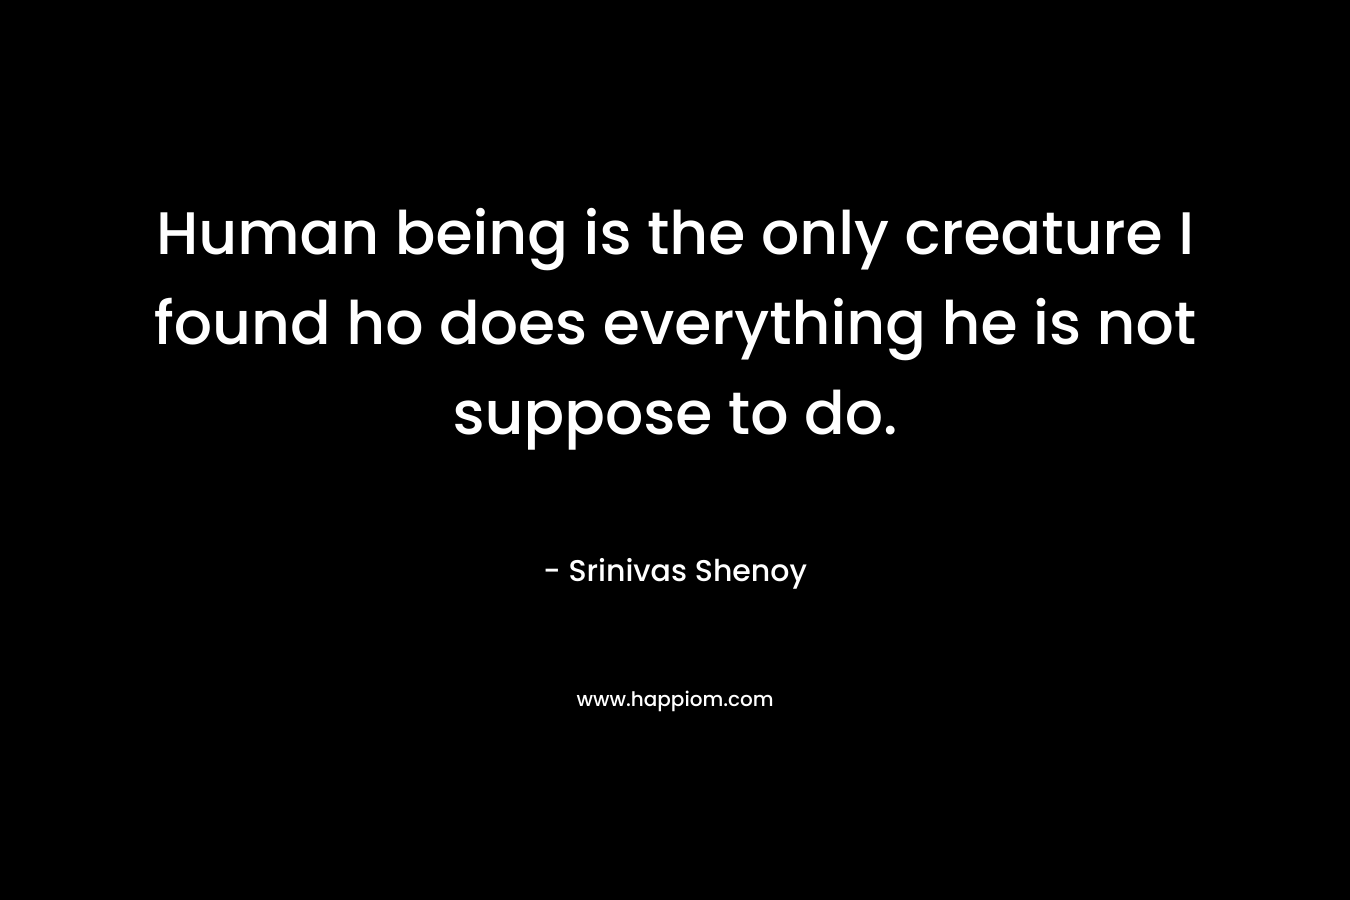 Human being is the only creature I found ho does everything he is not suppose to do. – Srinivas Shenoy